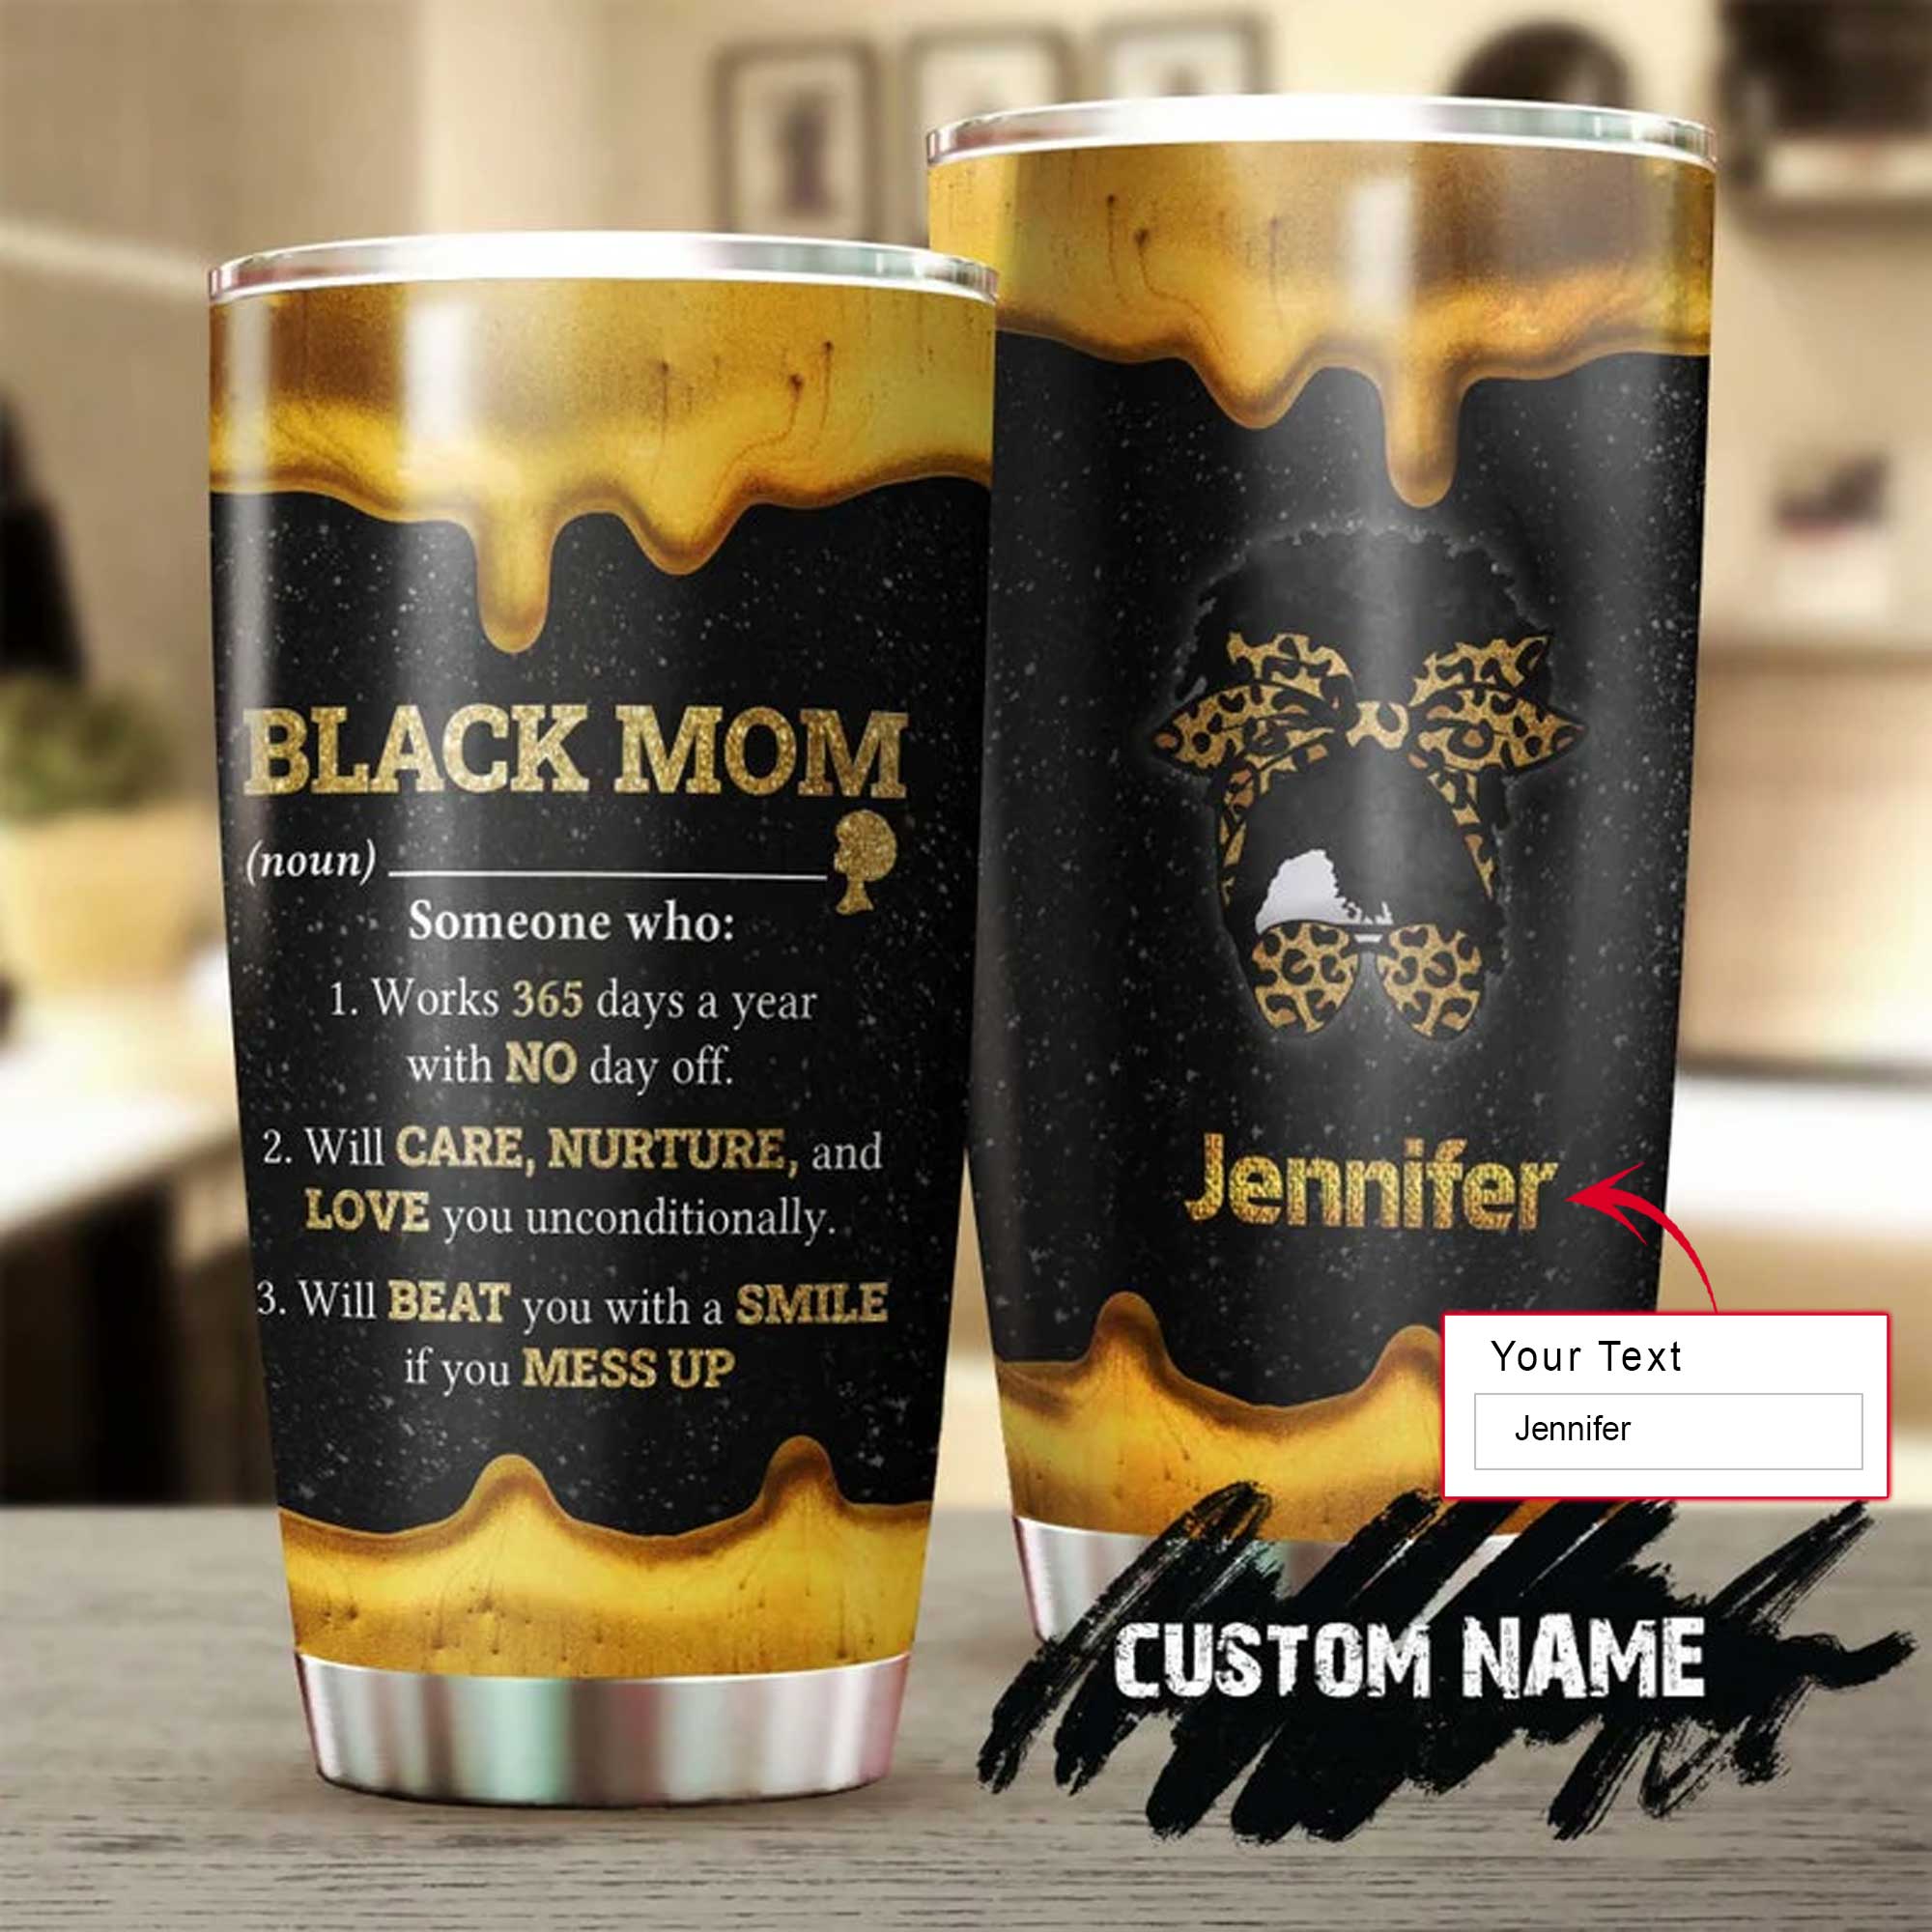 Personalized Mother's Day Gift Tumbler - Custom Gift For Mother's Day, Presents For Mom-Black Mom Definition Work 365 Days Without Any Day Off Tumbler